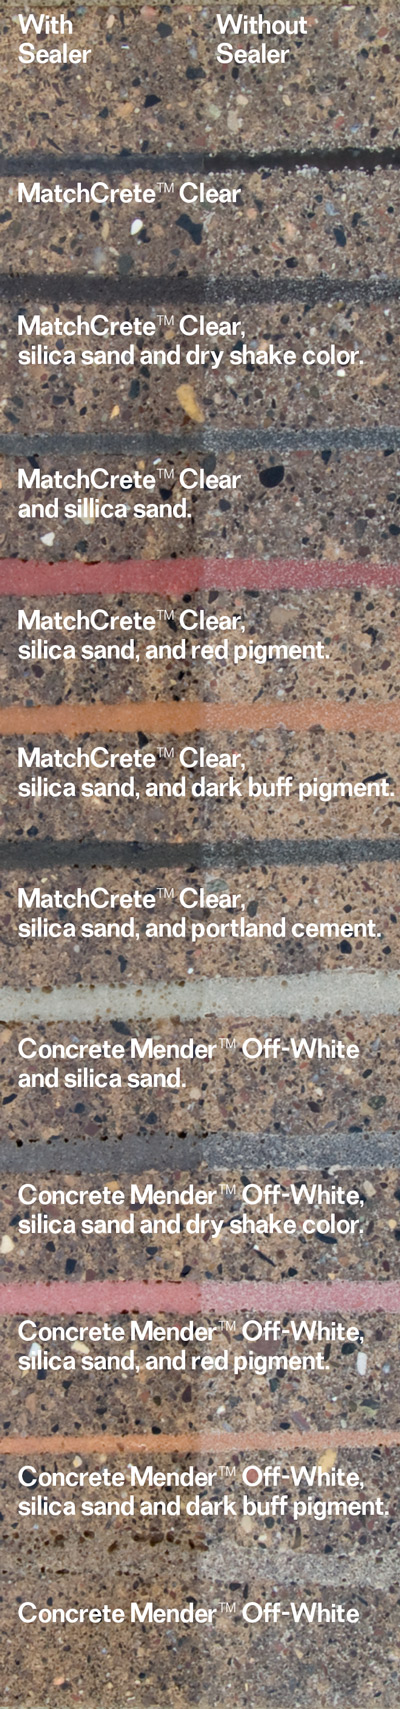 MatchCrete™ Clear and Concrete Mender™ Off-white user custom color samples.